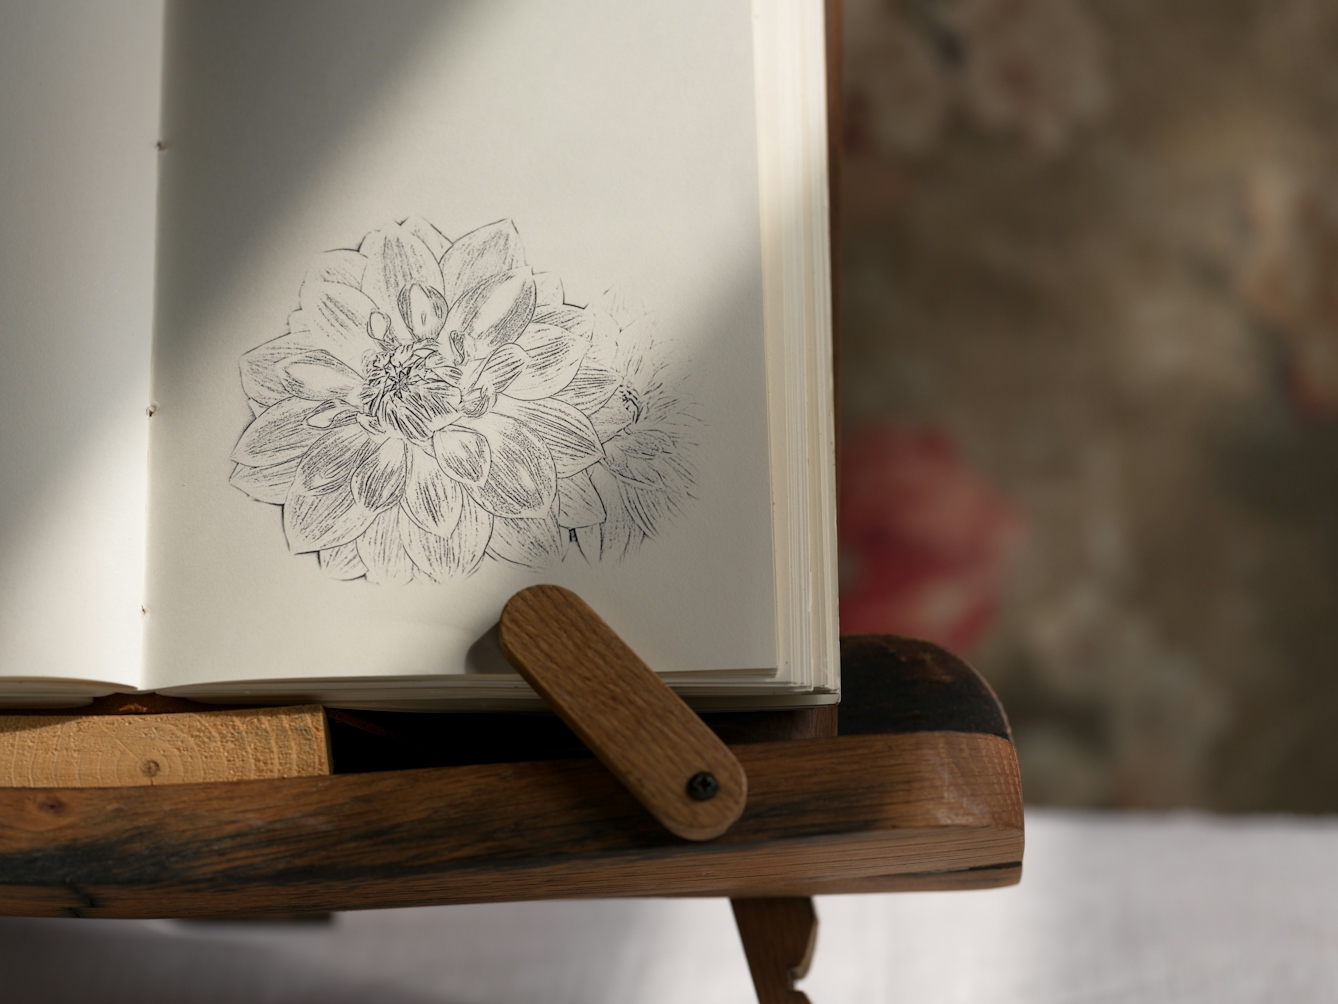 Photograph of a notebook on a wooden book stand, lit by a window from the right, casting a shadow on half of the page. On the right page there is a sketch of a flower.